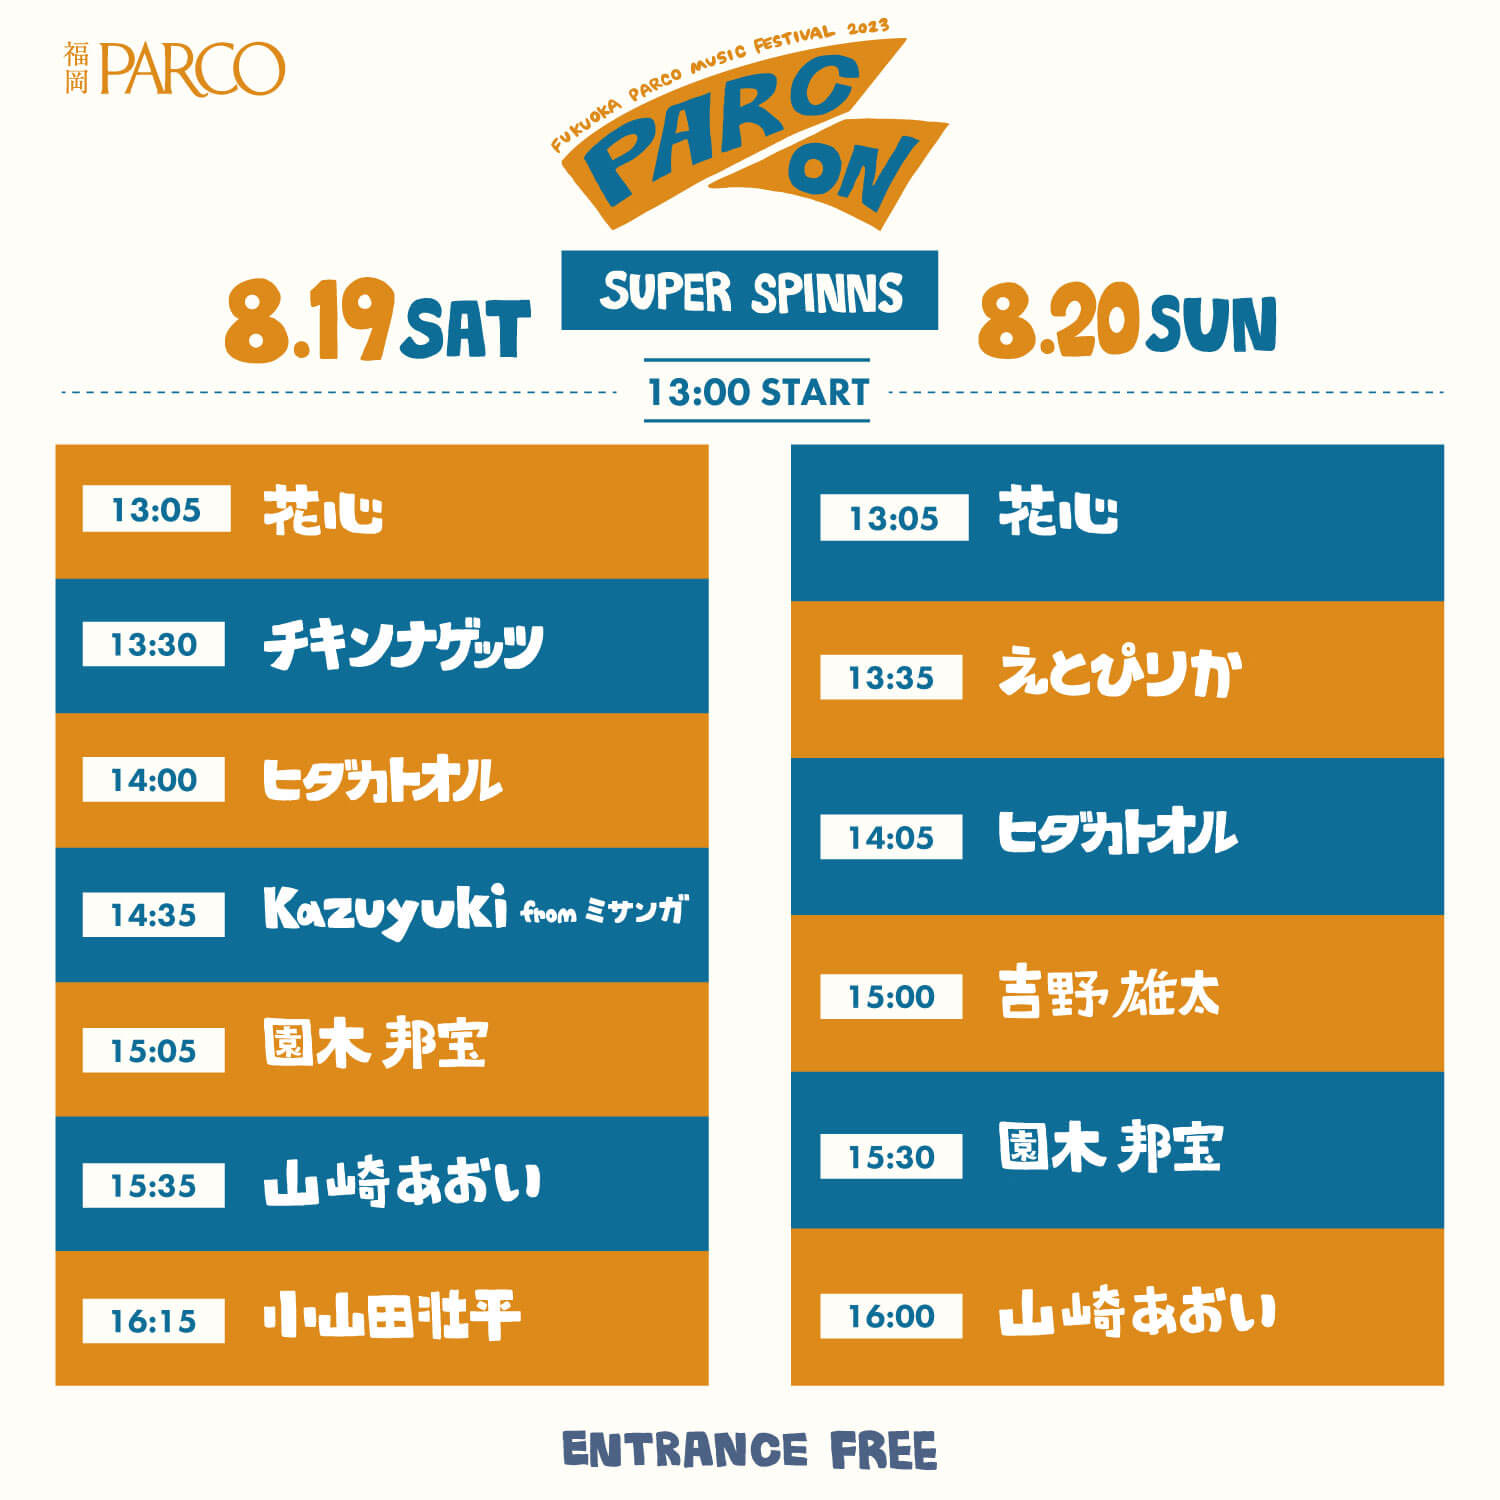 SUPER SPINNS TIME TABLE